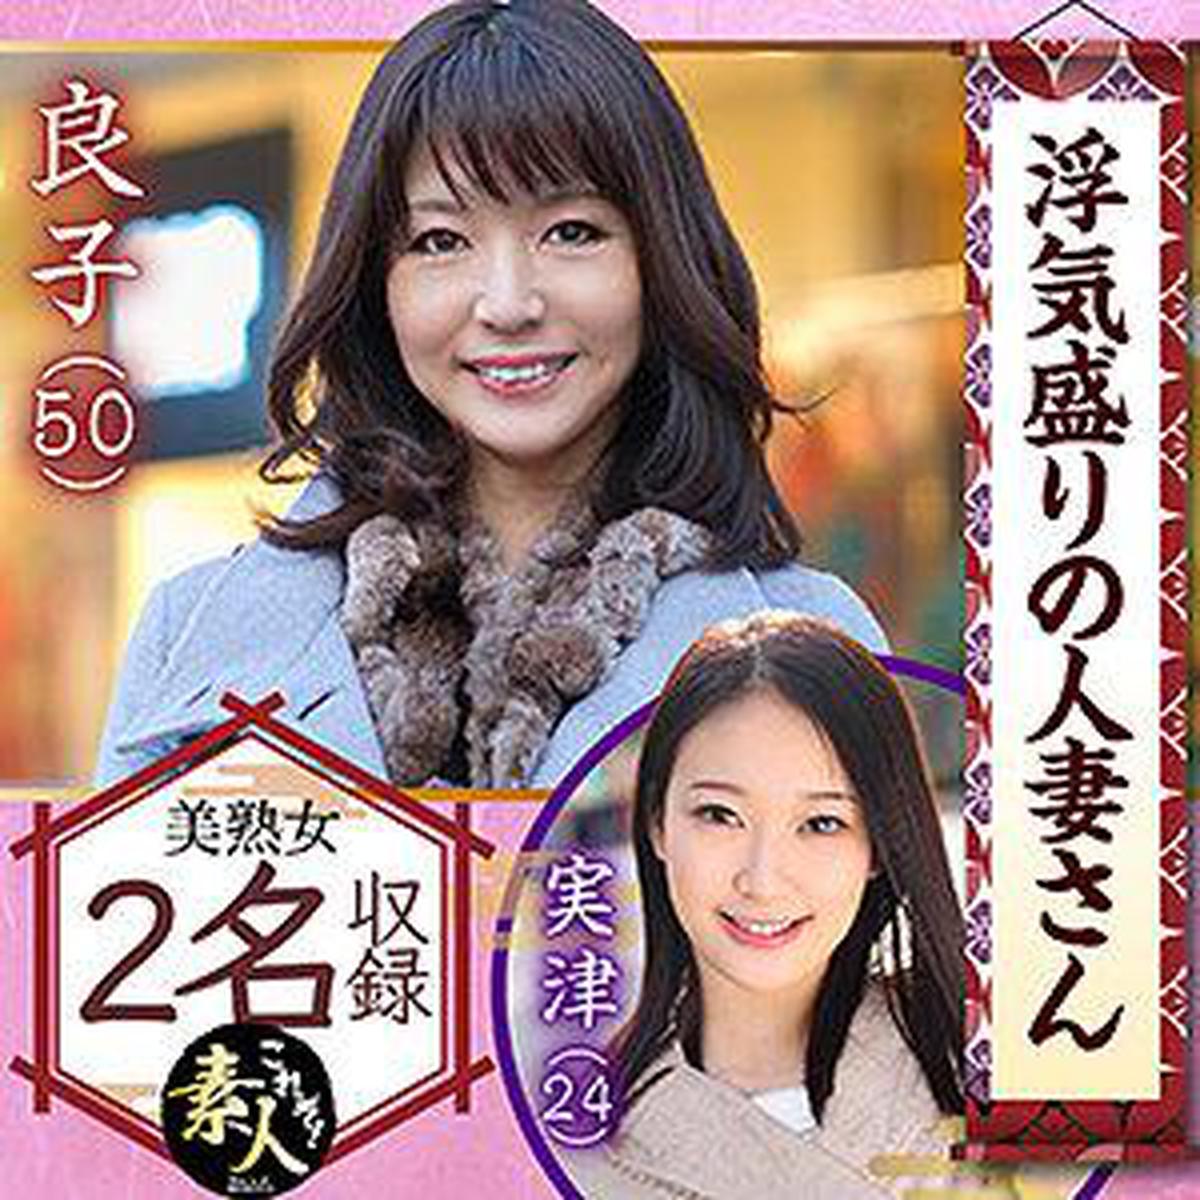 558KRS-015 Cheating Married Woman Celebrity Wife's Indecent Foolery